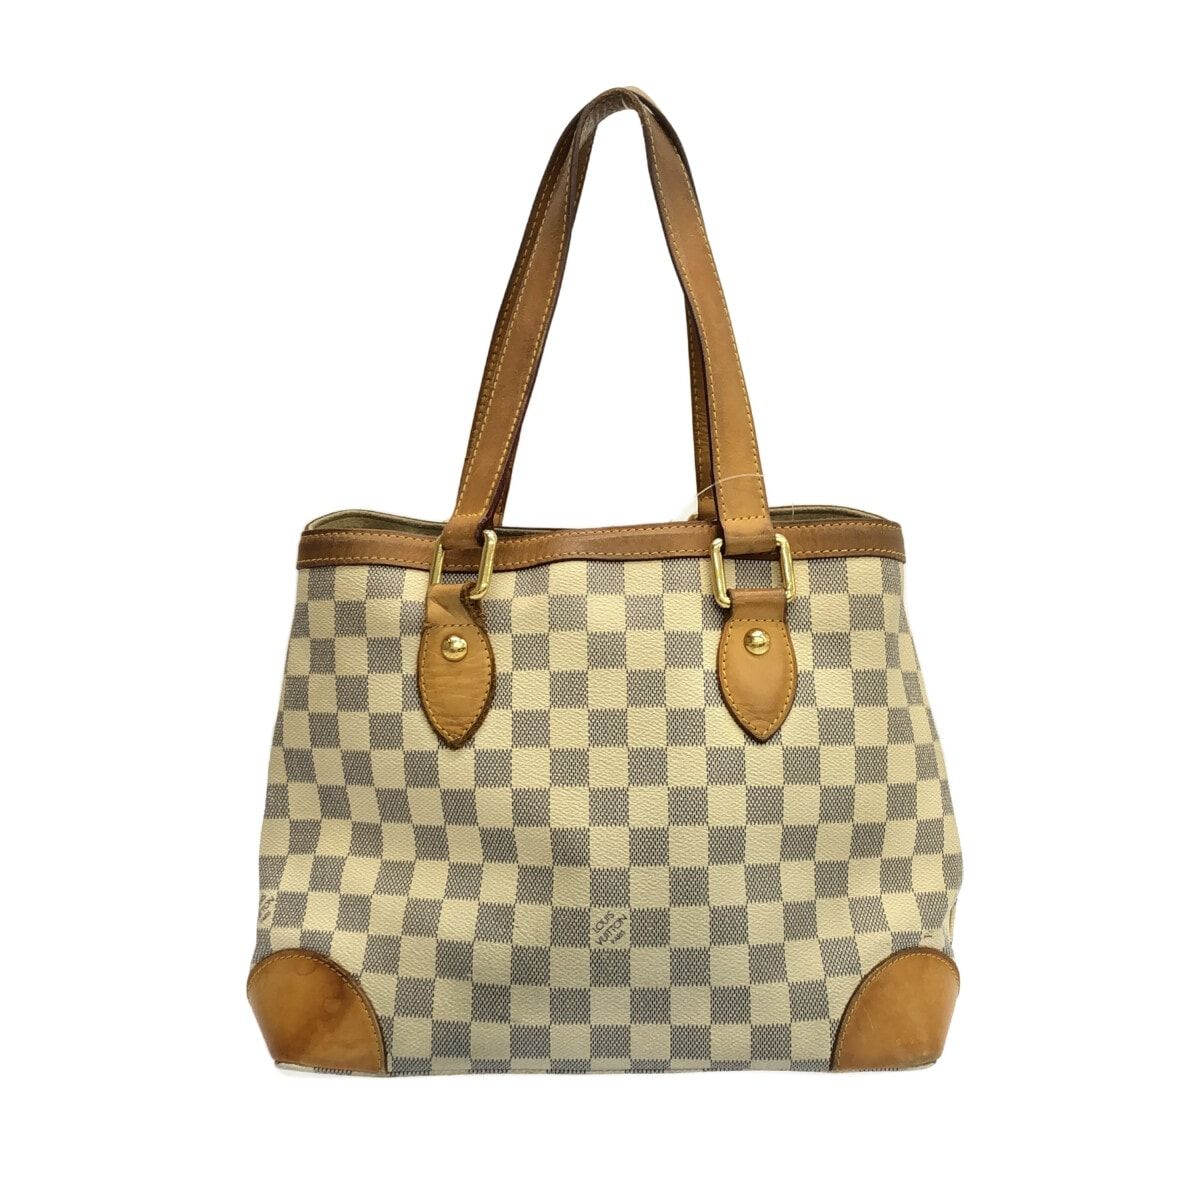 LOUIS VUITTON(ルイヴィトン) トートバッグ ダミエ ハムプステッドPM 